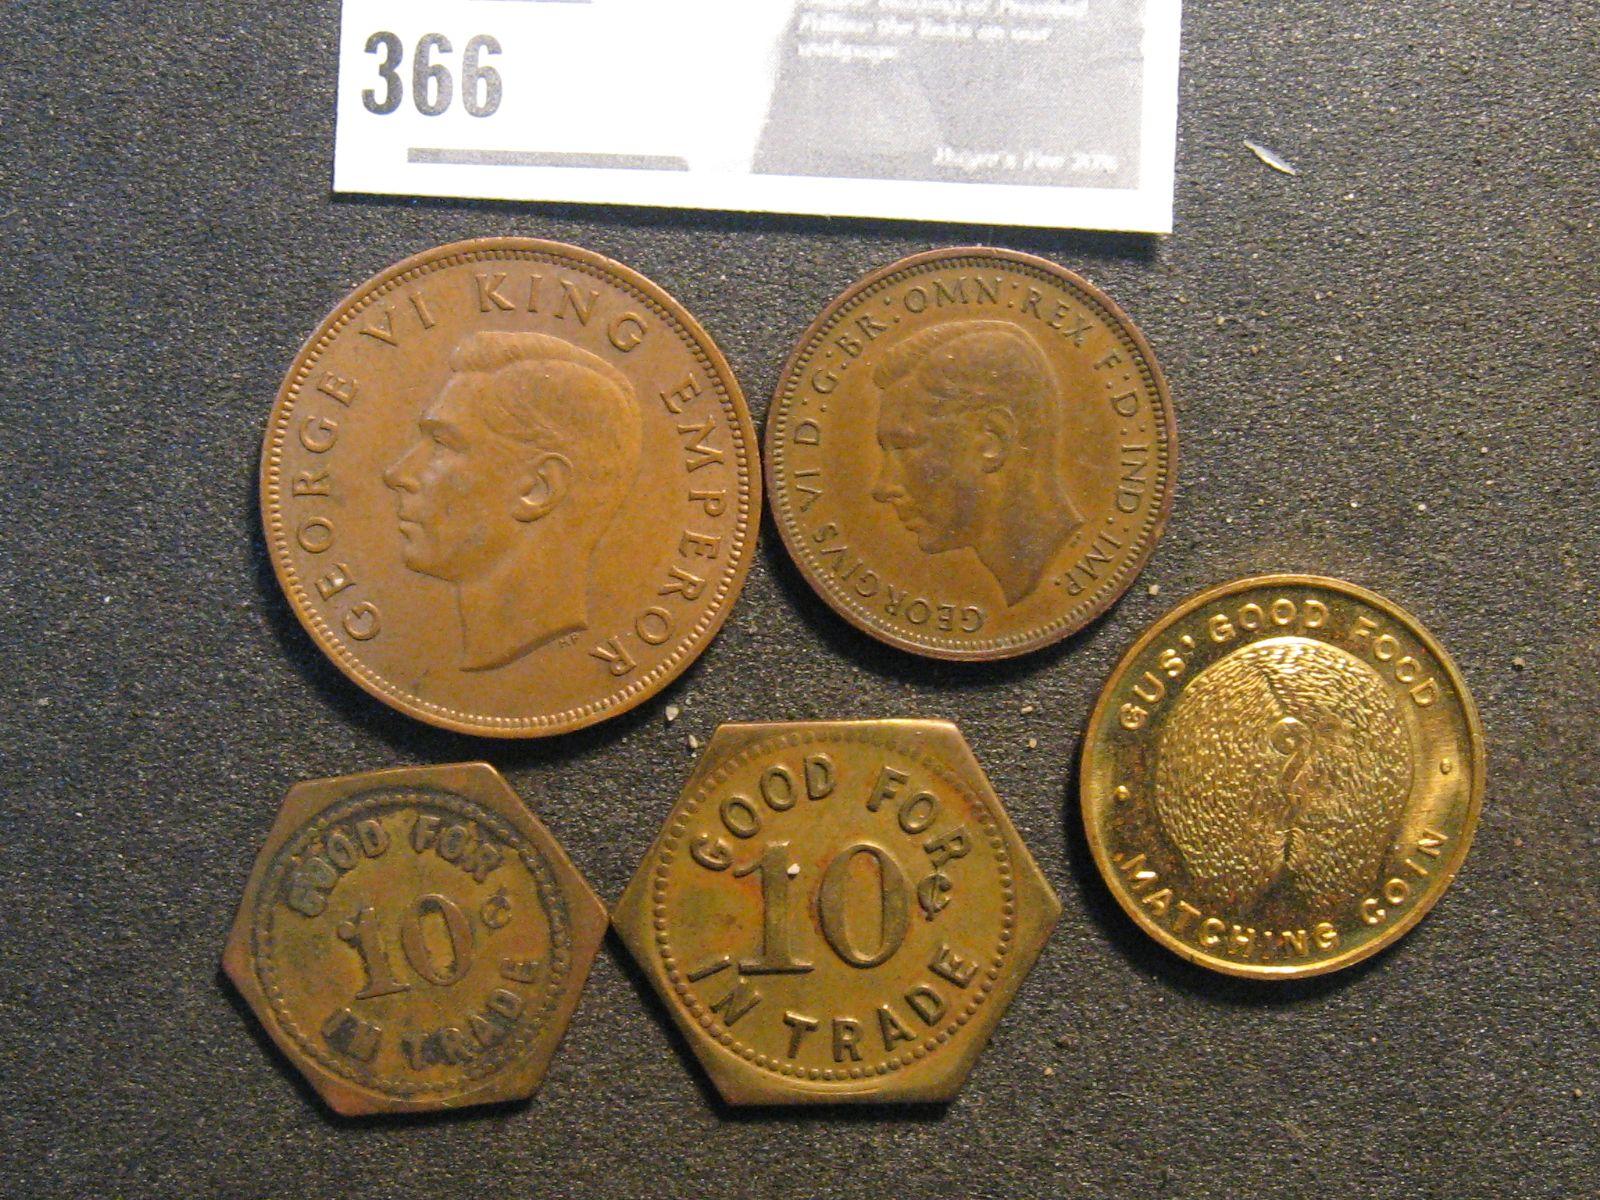 (2) Macerick Richard's Smoke Shop Good for 10c in Trade Tokens, Gus Good For matching Coin, 1942 Bri